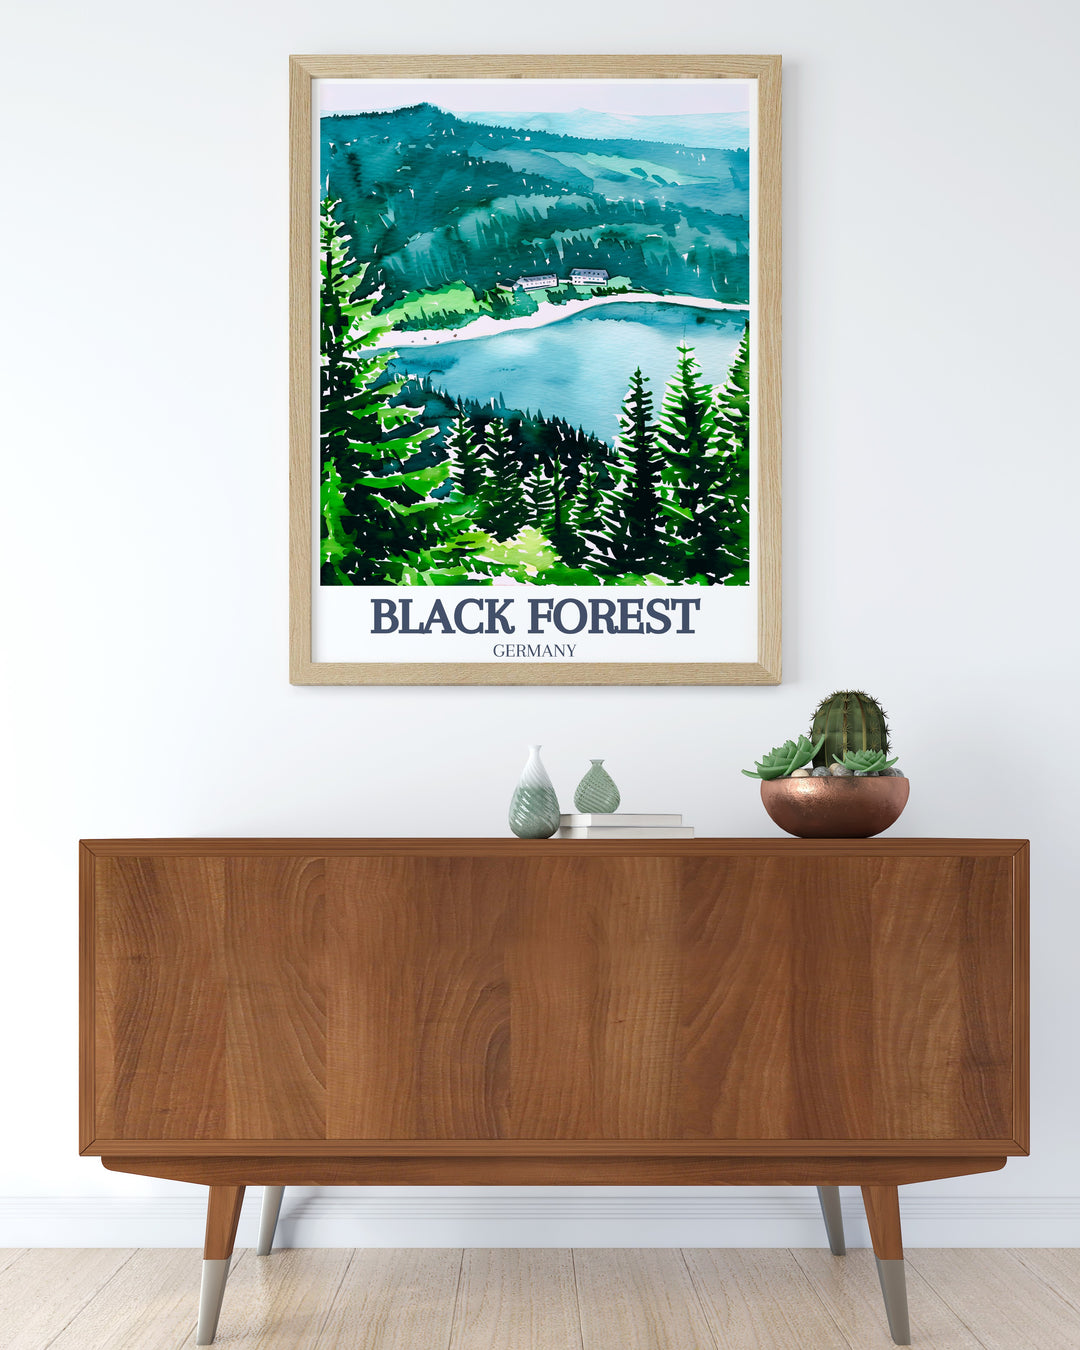 Enhance your home with a stunning depiction of Mummelsee Lake, Triberg Waterfalls featured in this Germany Forest Print perfect for Black Forest decor and a thoughtful gift for anyone who loves nature inspired art and the serene beauty of the Schwarzwald region